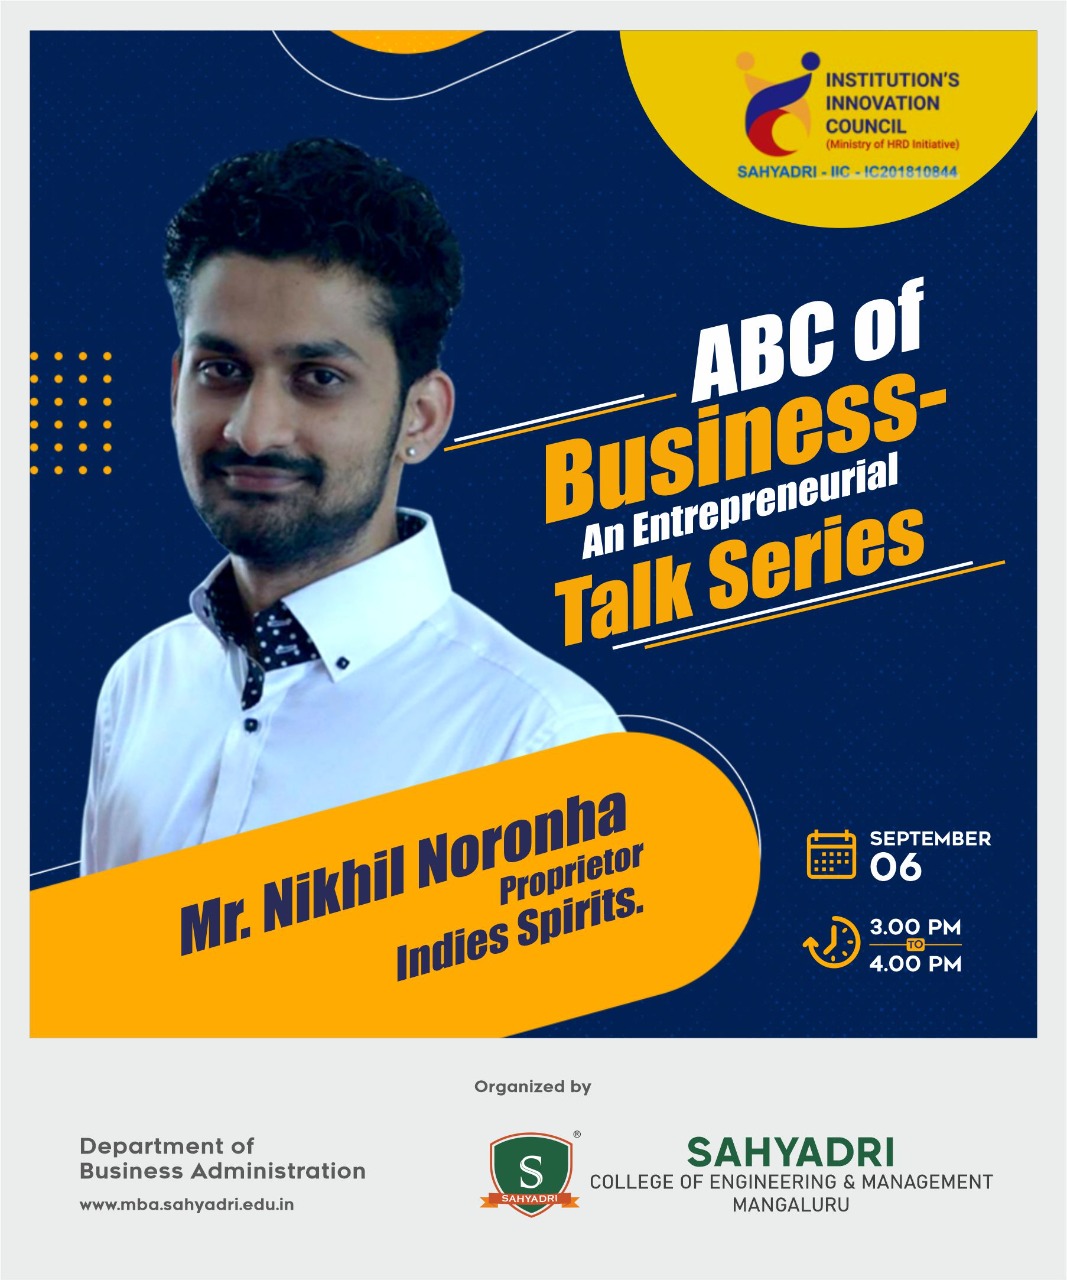 ABC of Business - An Entrepreneurial Talk series for MBAs